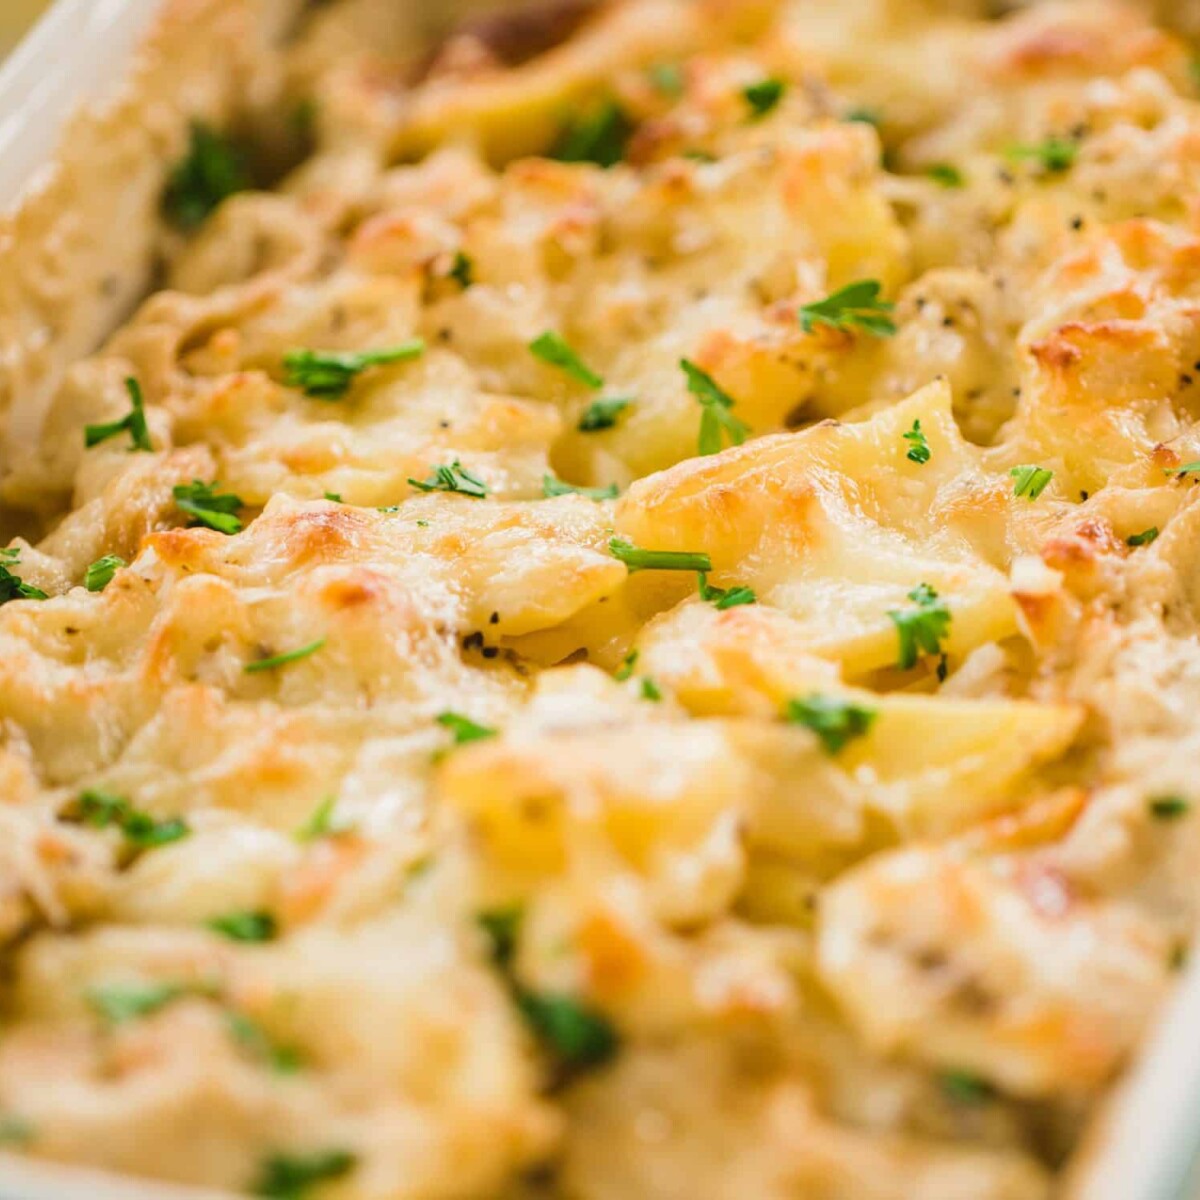 Golden brown, cheesy Au Gratin potatoes sit in a decorative casserole dish ready to enjoy.